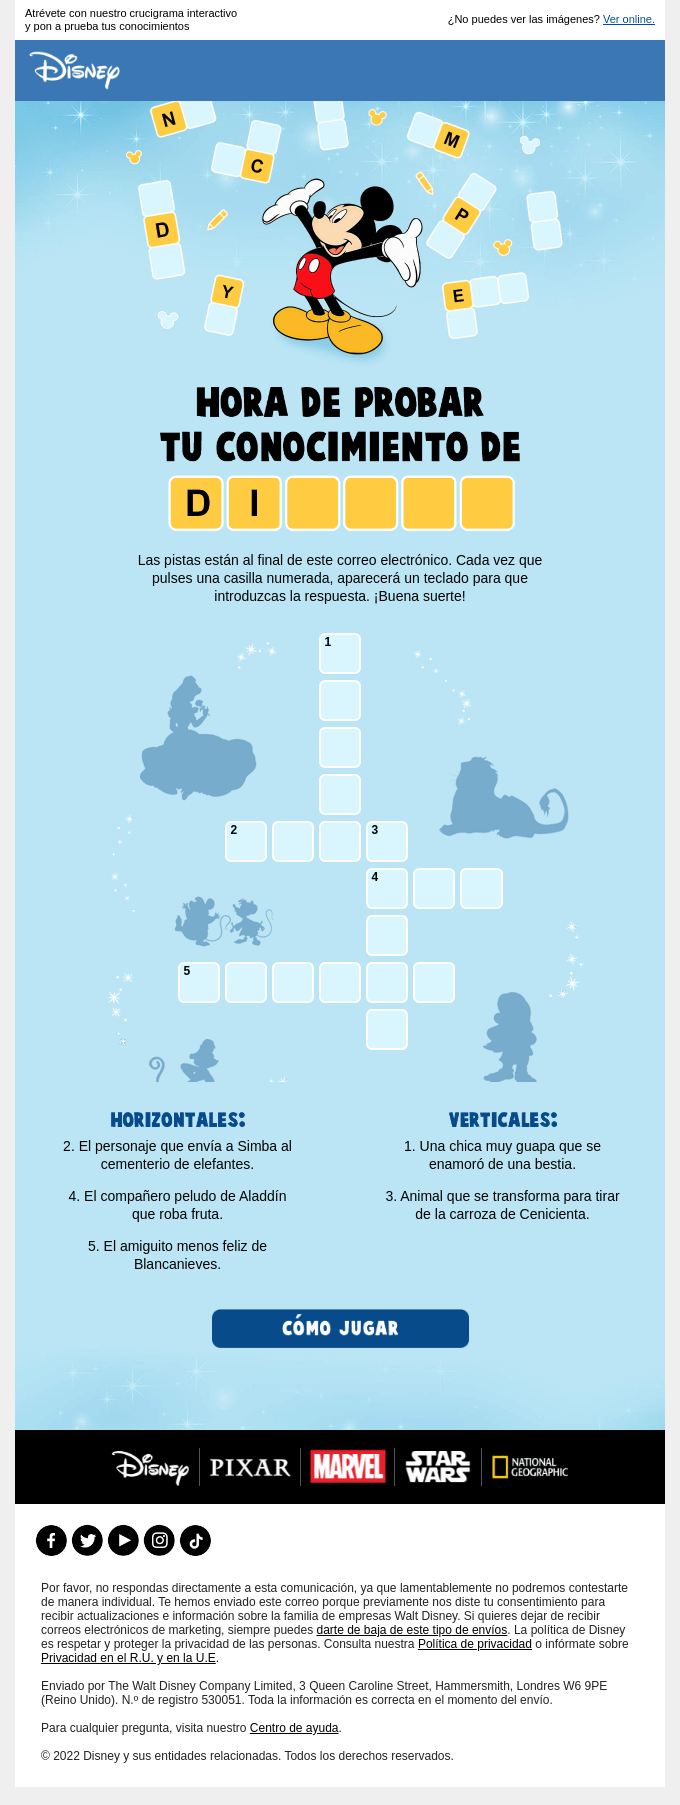 Can you resolve this Disney crossword?